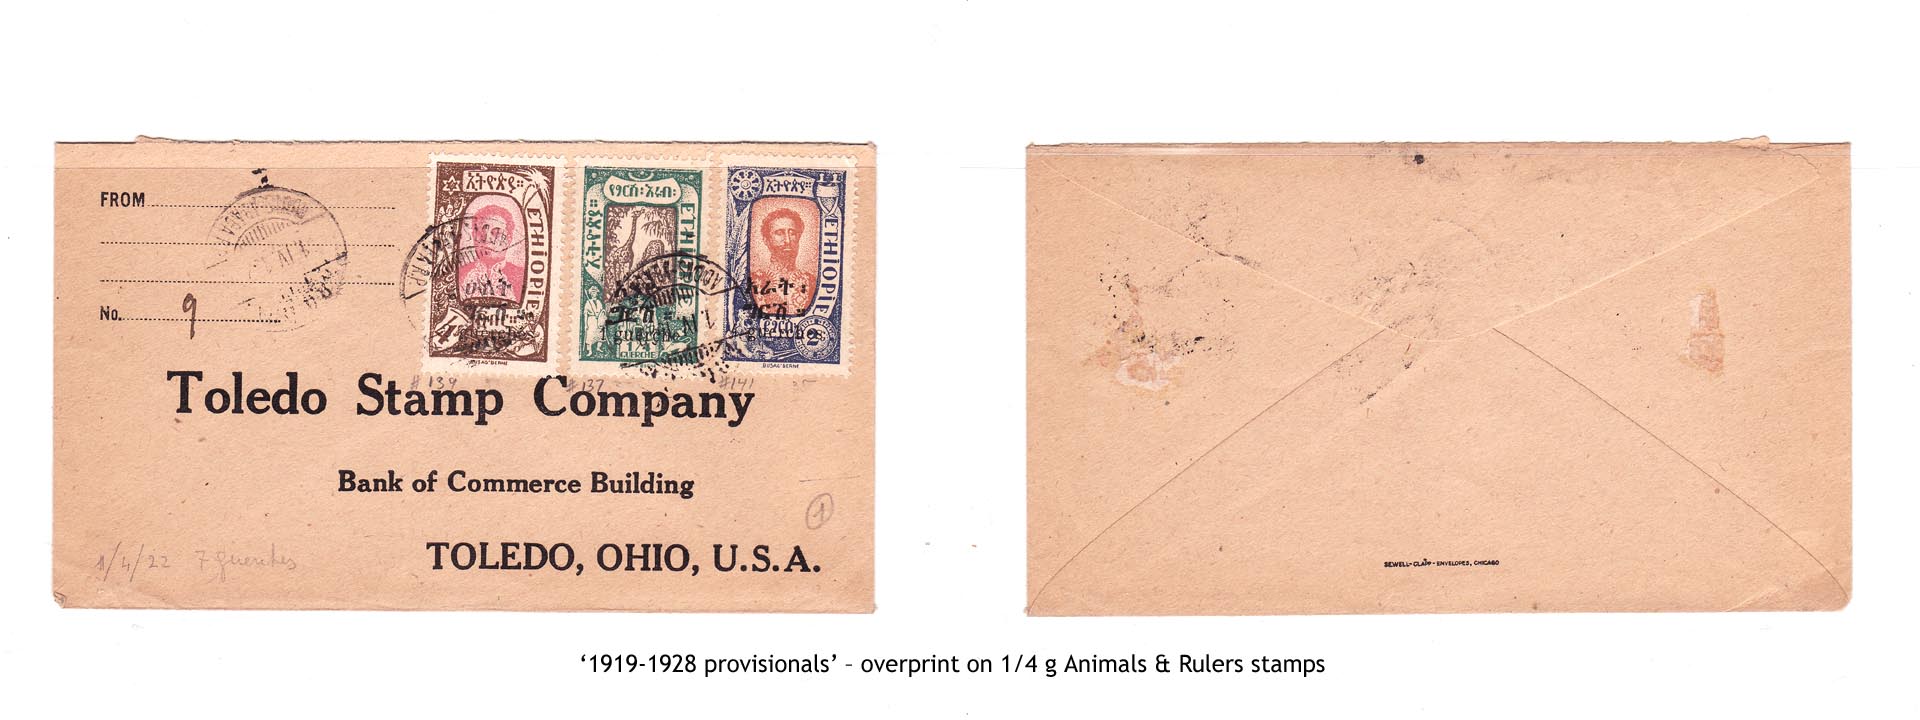 1919-1928 provisionals’ – overprint on 1-4 g Animals & Rulers stamps